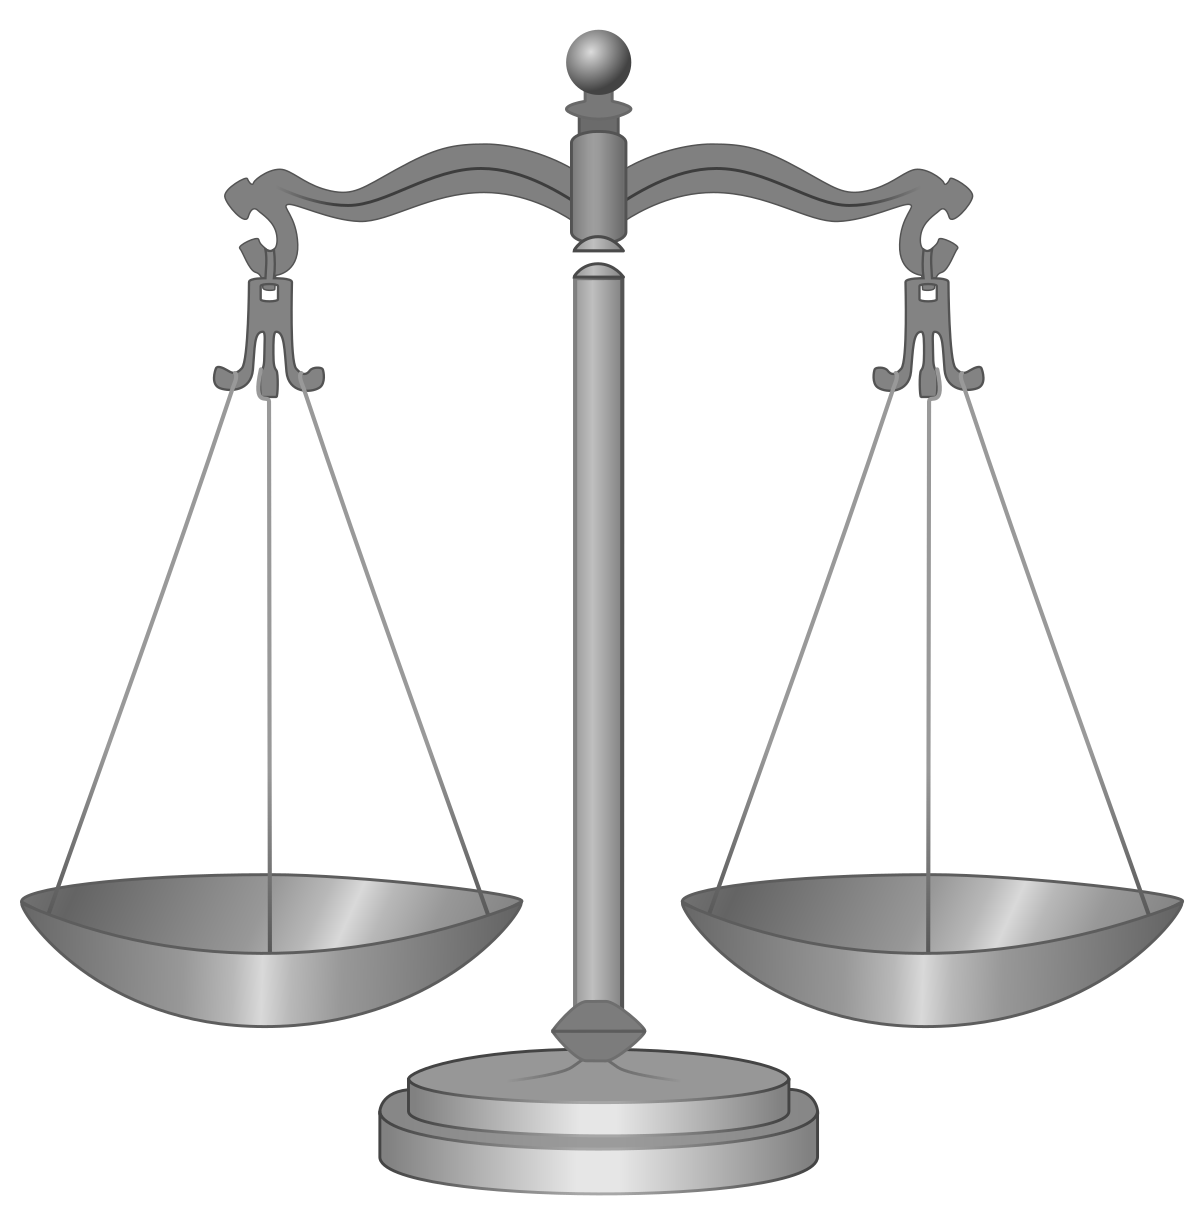 Balance scales with one side higher than the other